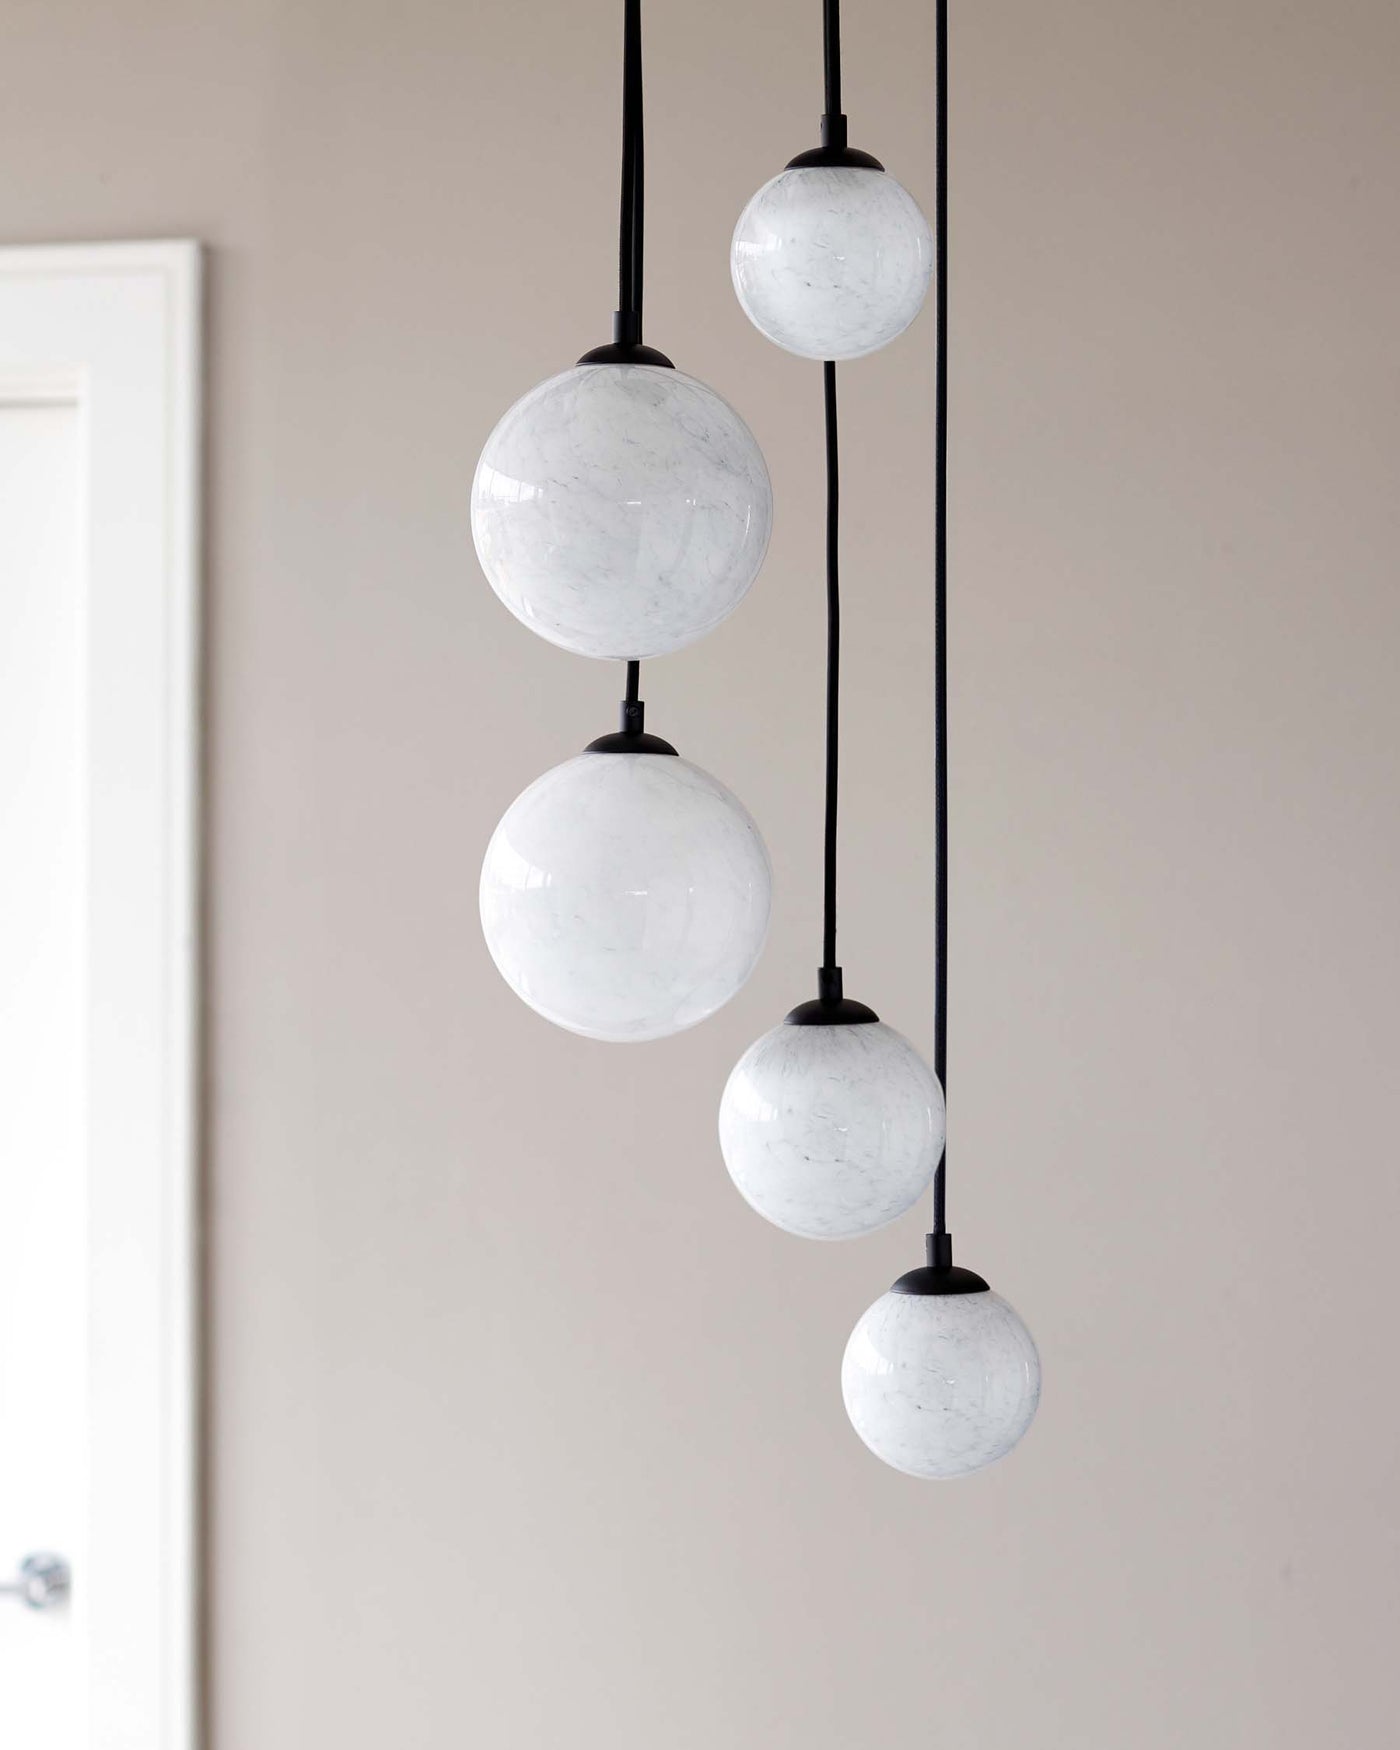 Modern pendant light fixture with five spherical, white marbled glass shades of different sizes, suspended at varying heights by black cords against a light neutral background.